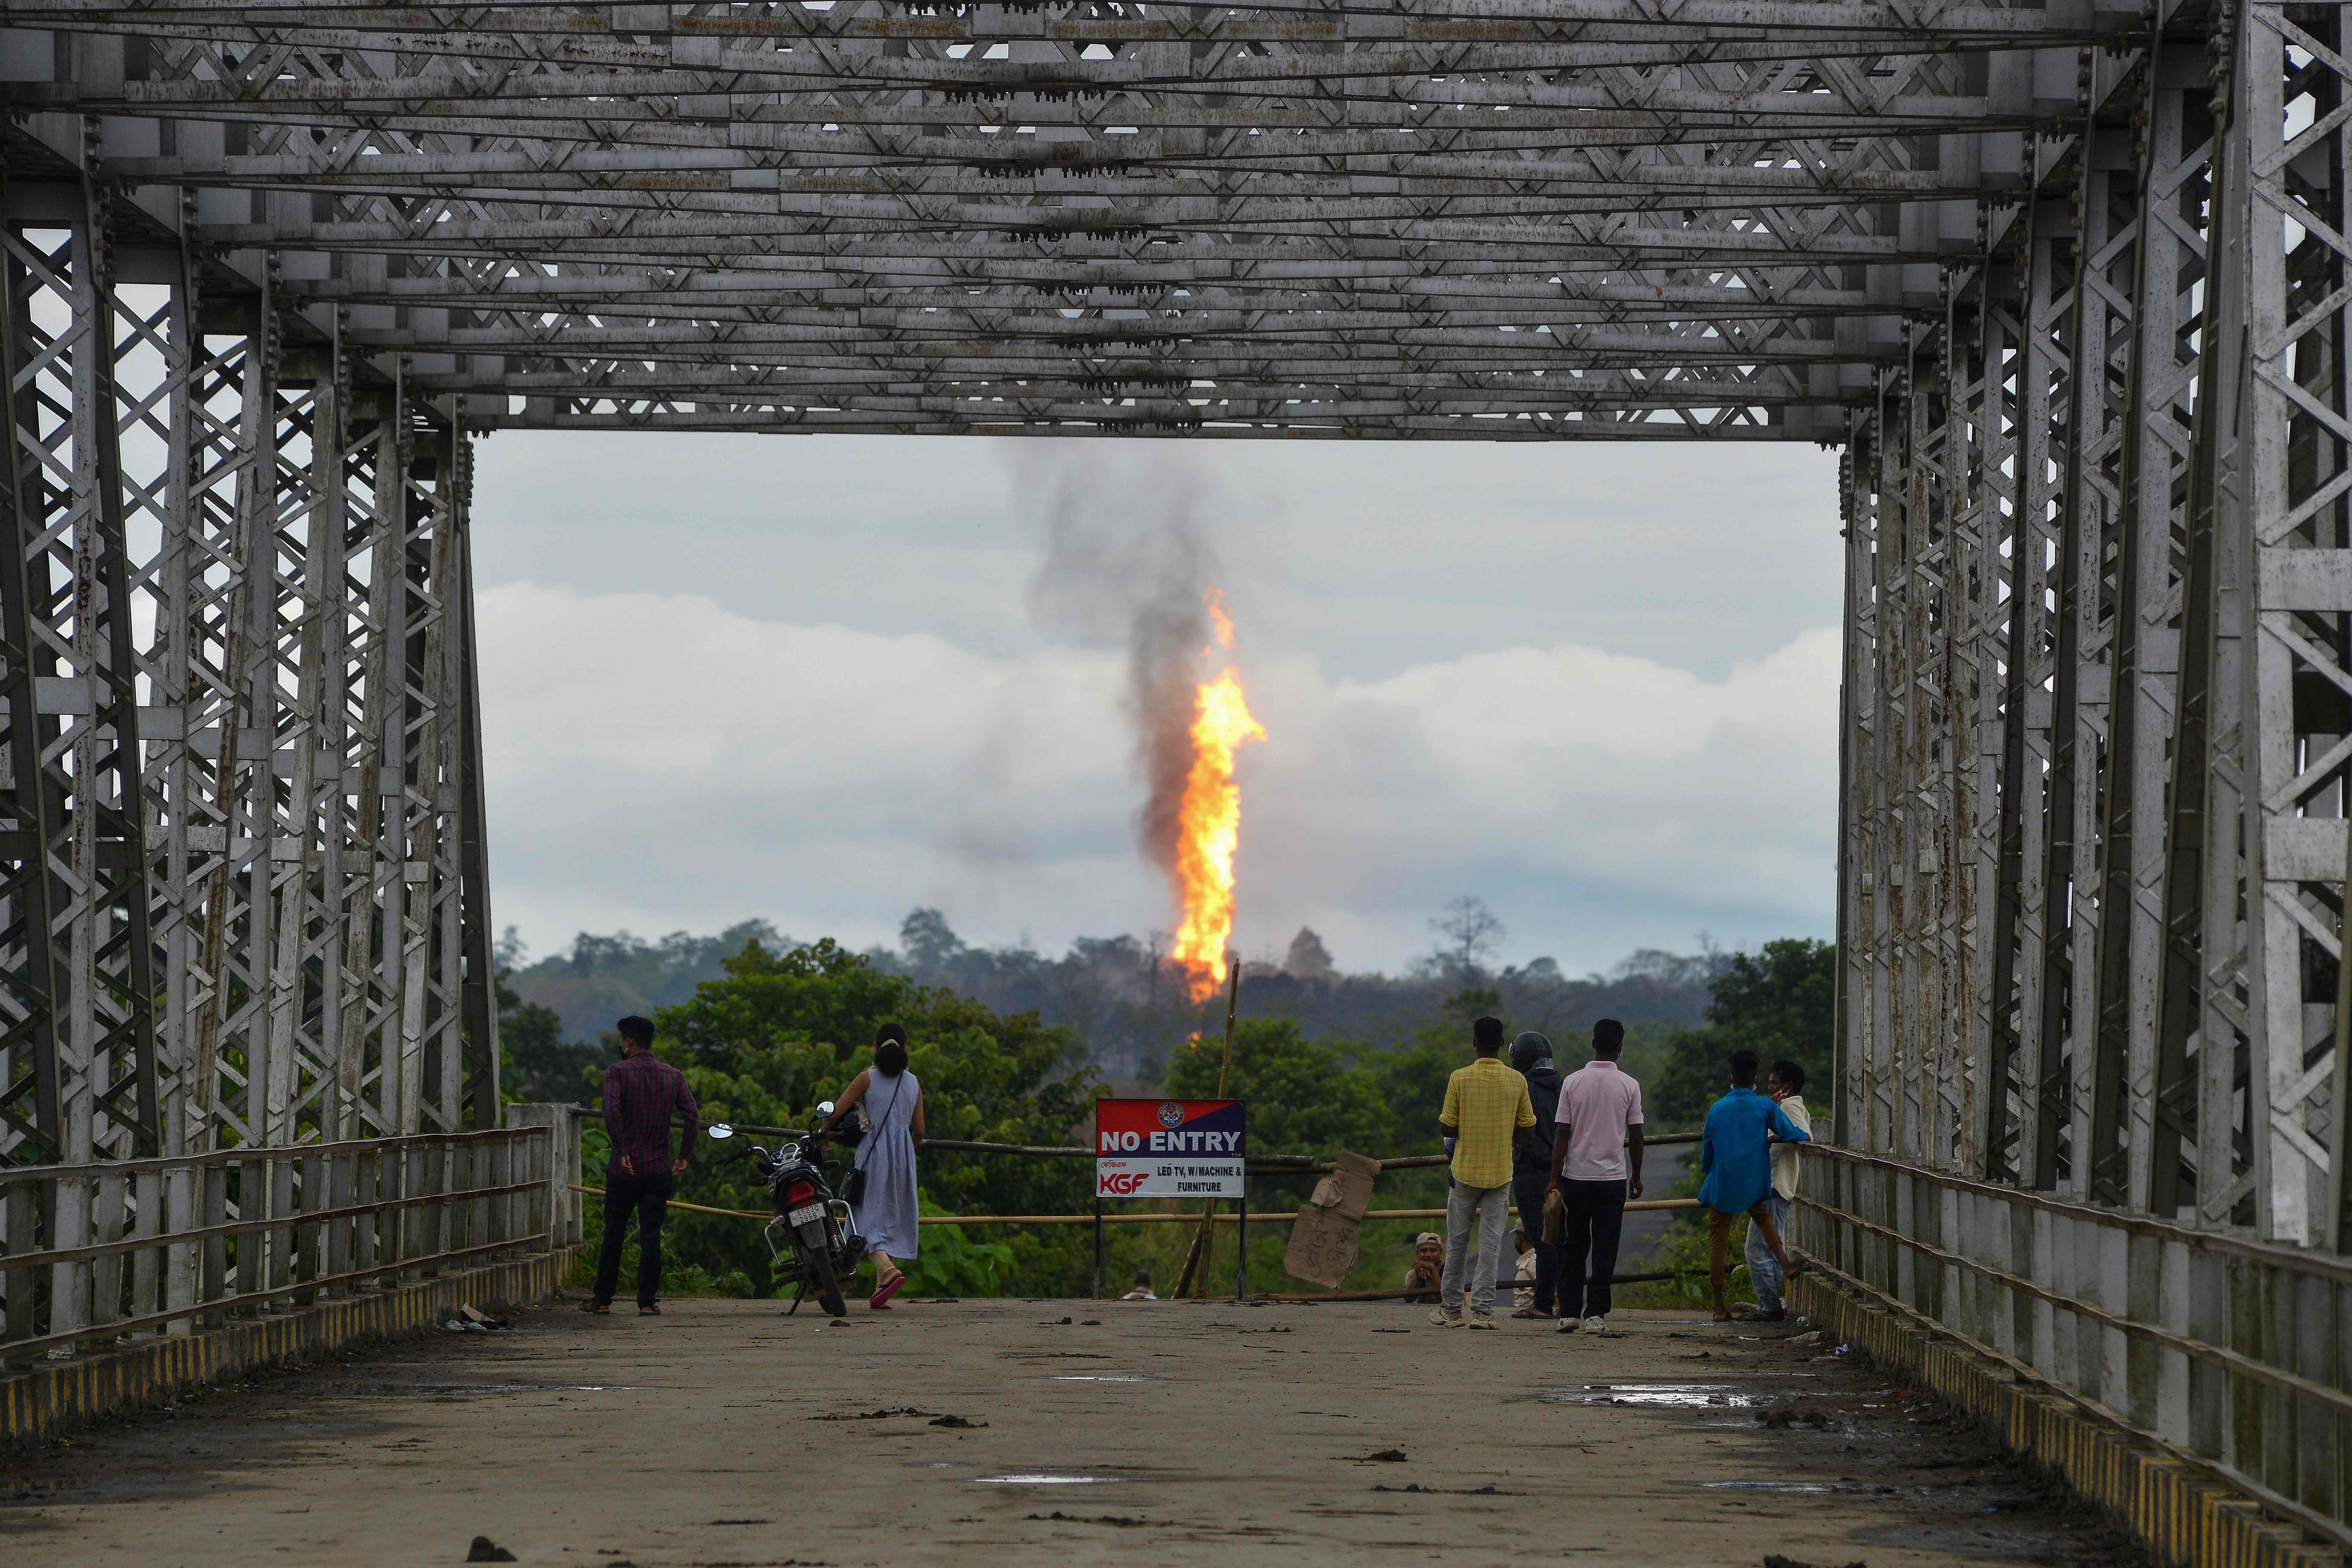  Two workers have been found dead near the site of a huge fire ignited by gas that has been spewing from an oil field in India for two weeks, officials said. A wall of flames and smoke continues to roar into the sky two days after the gas triggered an explosion at the well run by state-owned Oil India in the northeastern state of Assam. (Photo by AFP)